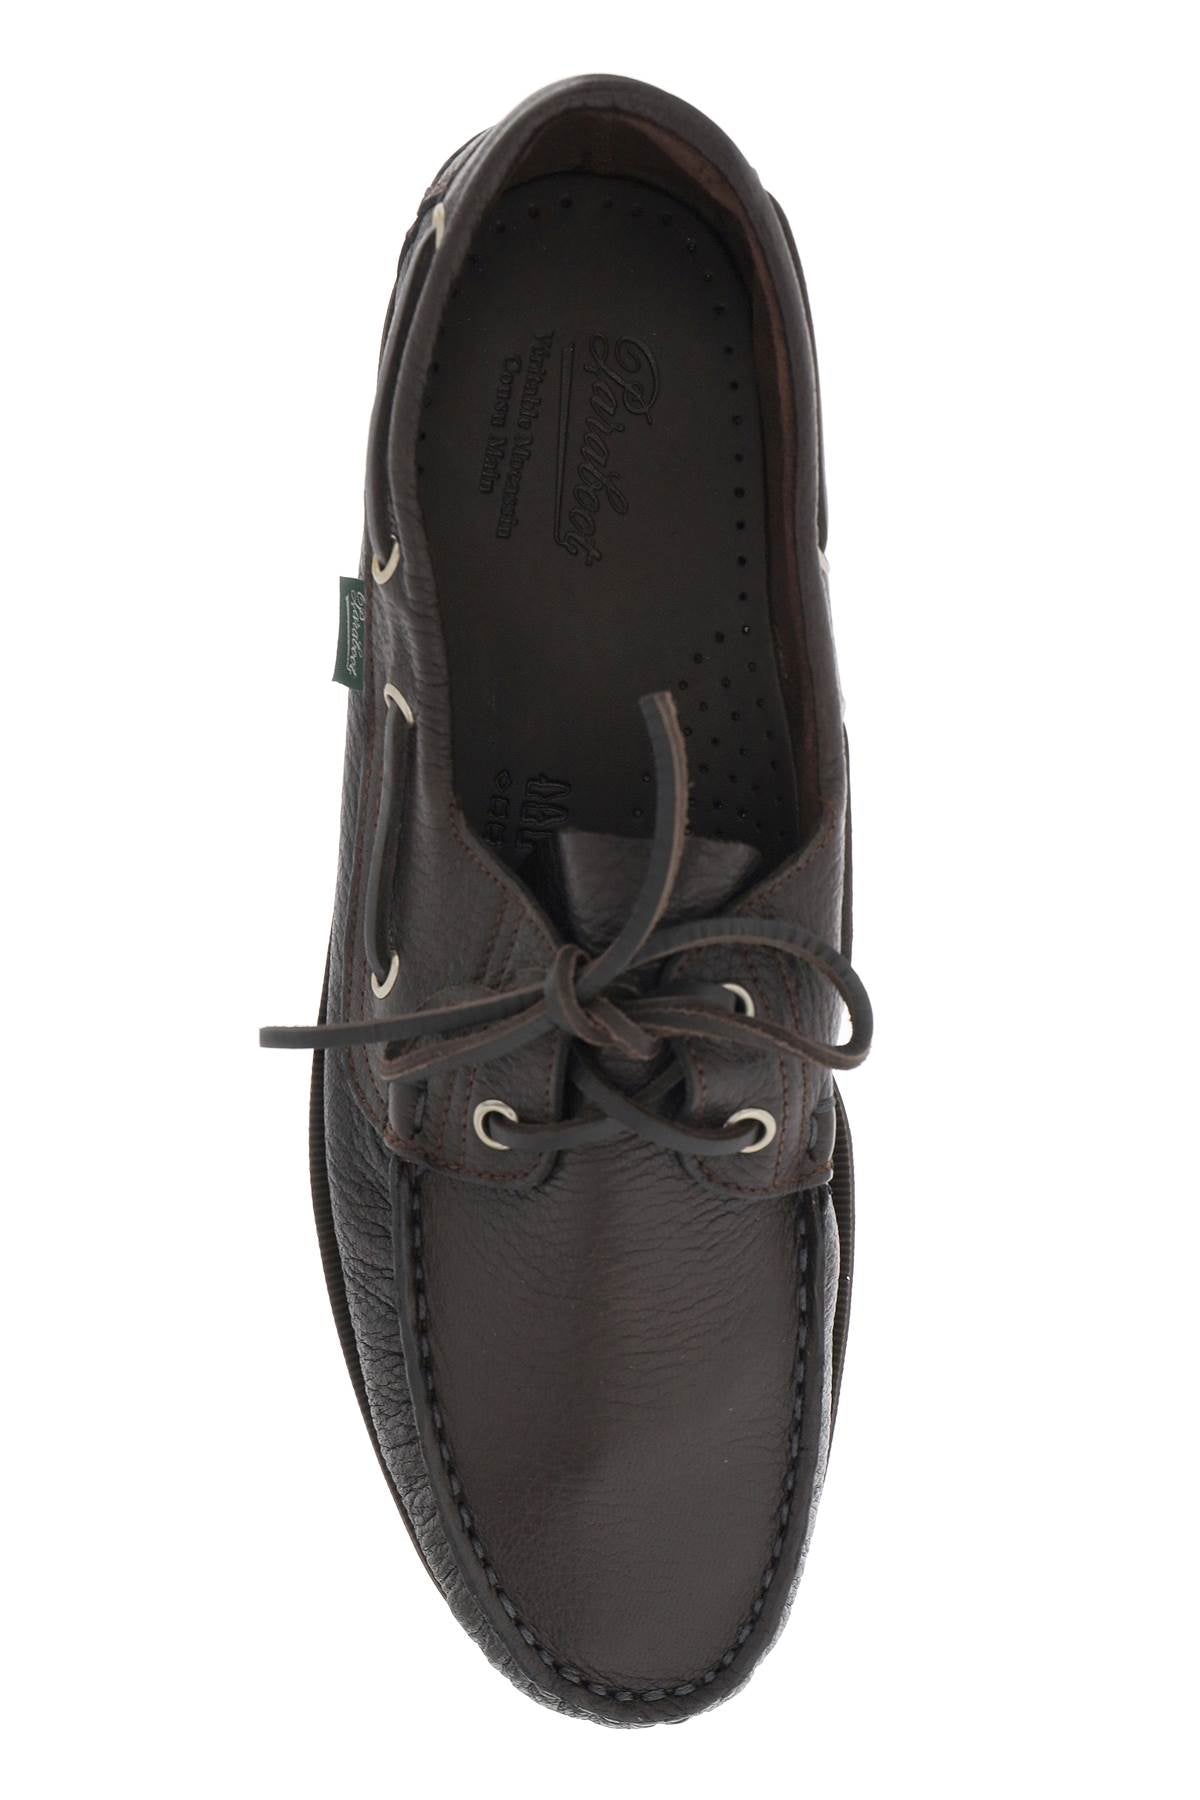 Paraboot barth loafers-1